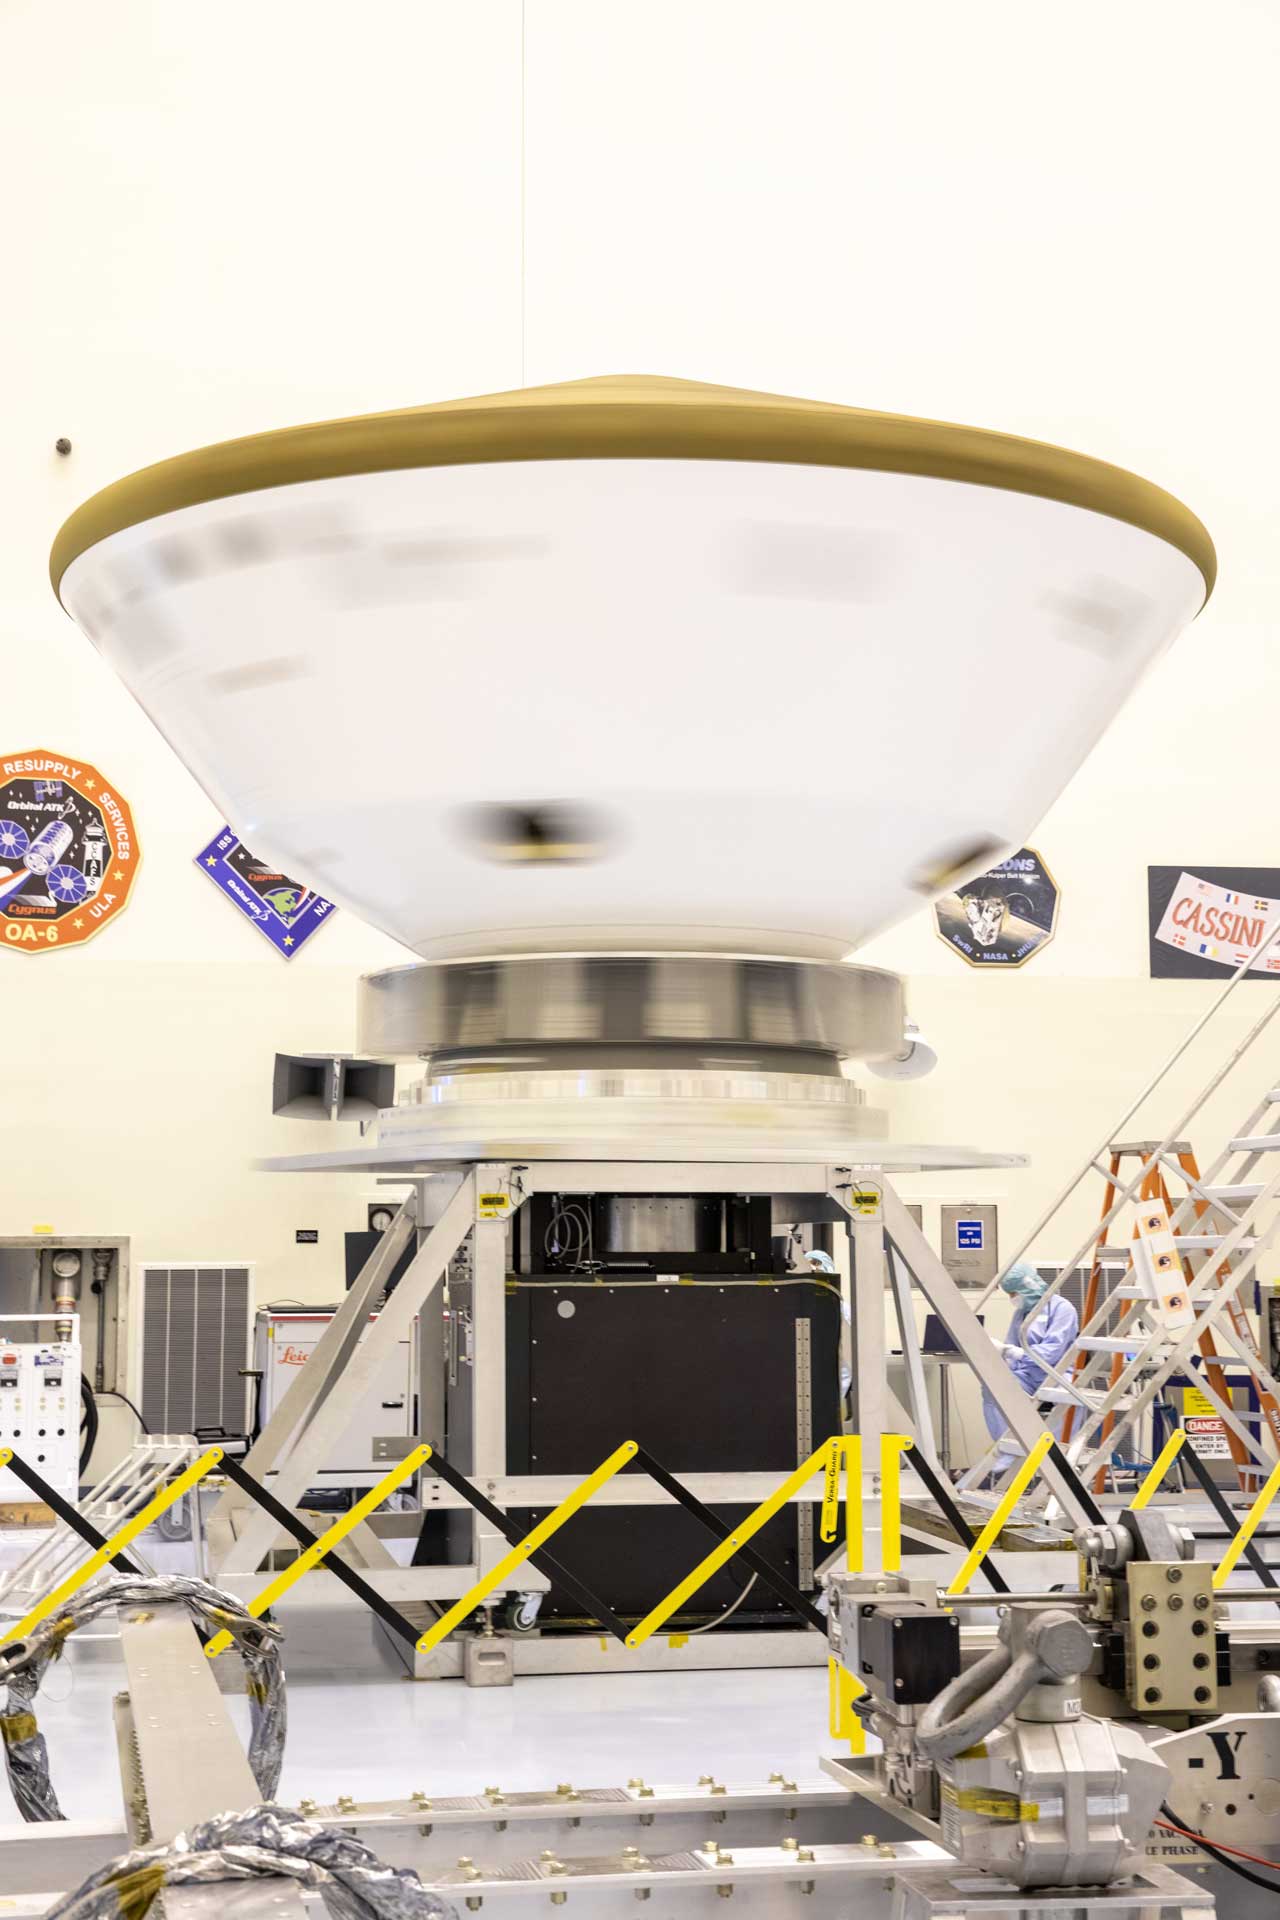 Tests to measure the center of gravity and moments of inertia for the Mars 2020 rover aeroshell are performed on the spin table inside Kennedy Space Center’s Payload Hazardous Servicing Facility on Jan. 15, 2020. 